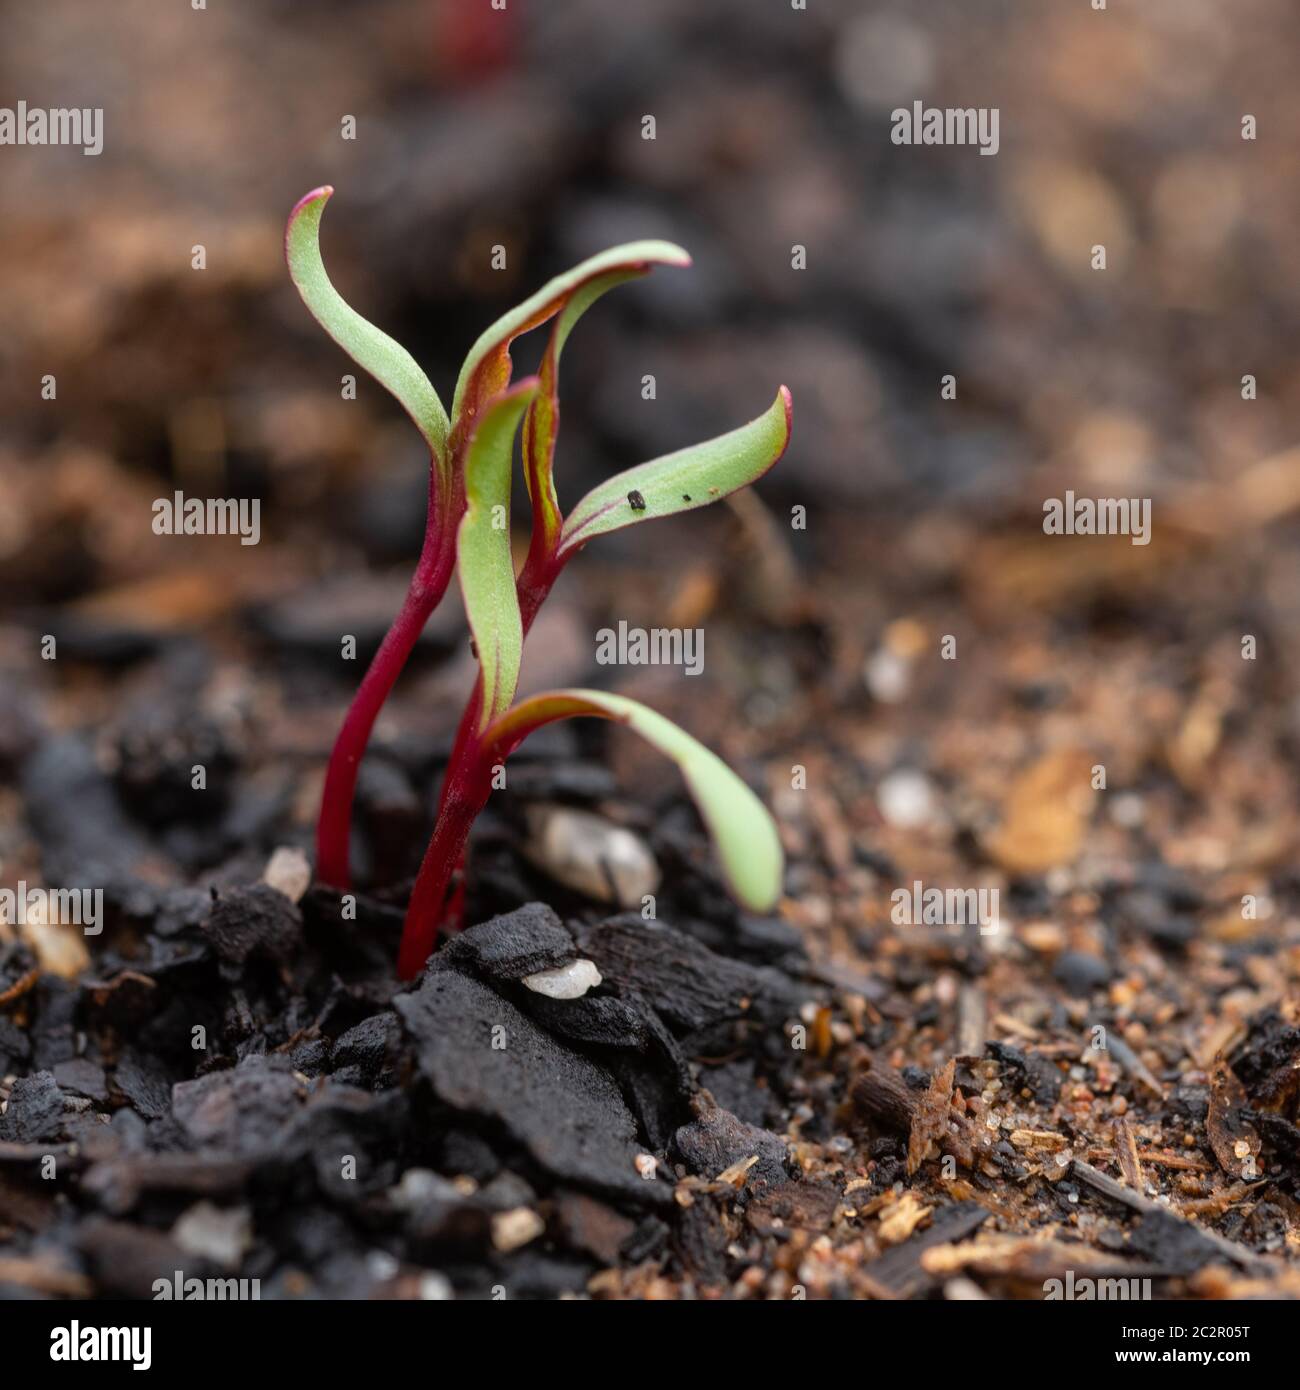 Two - three day old beetroot seedlings sprouting from a soil-block in a nursery of a market garden near Mildura, Victoria, Australia. Stock Photo